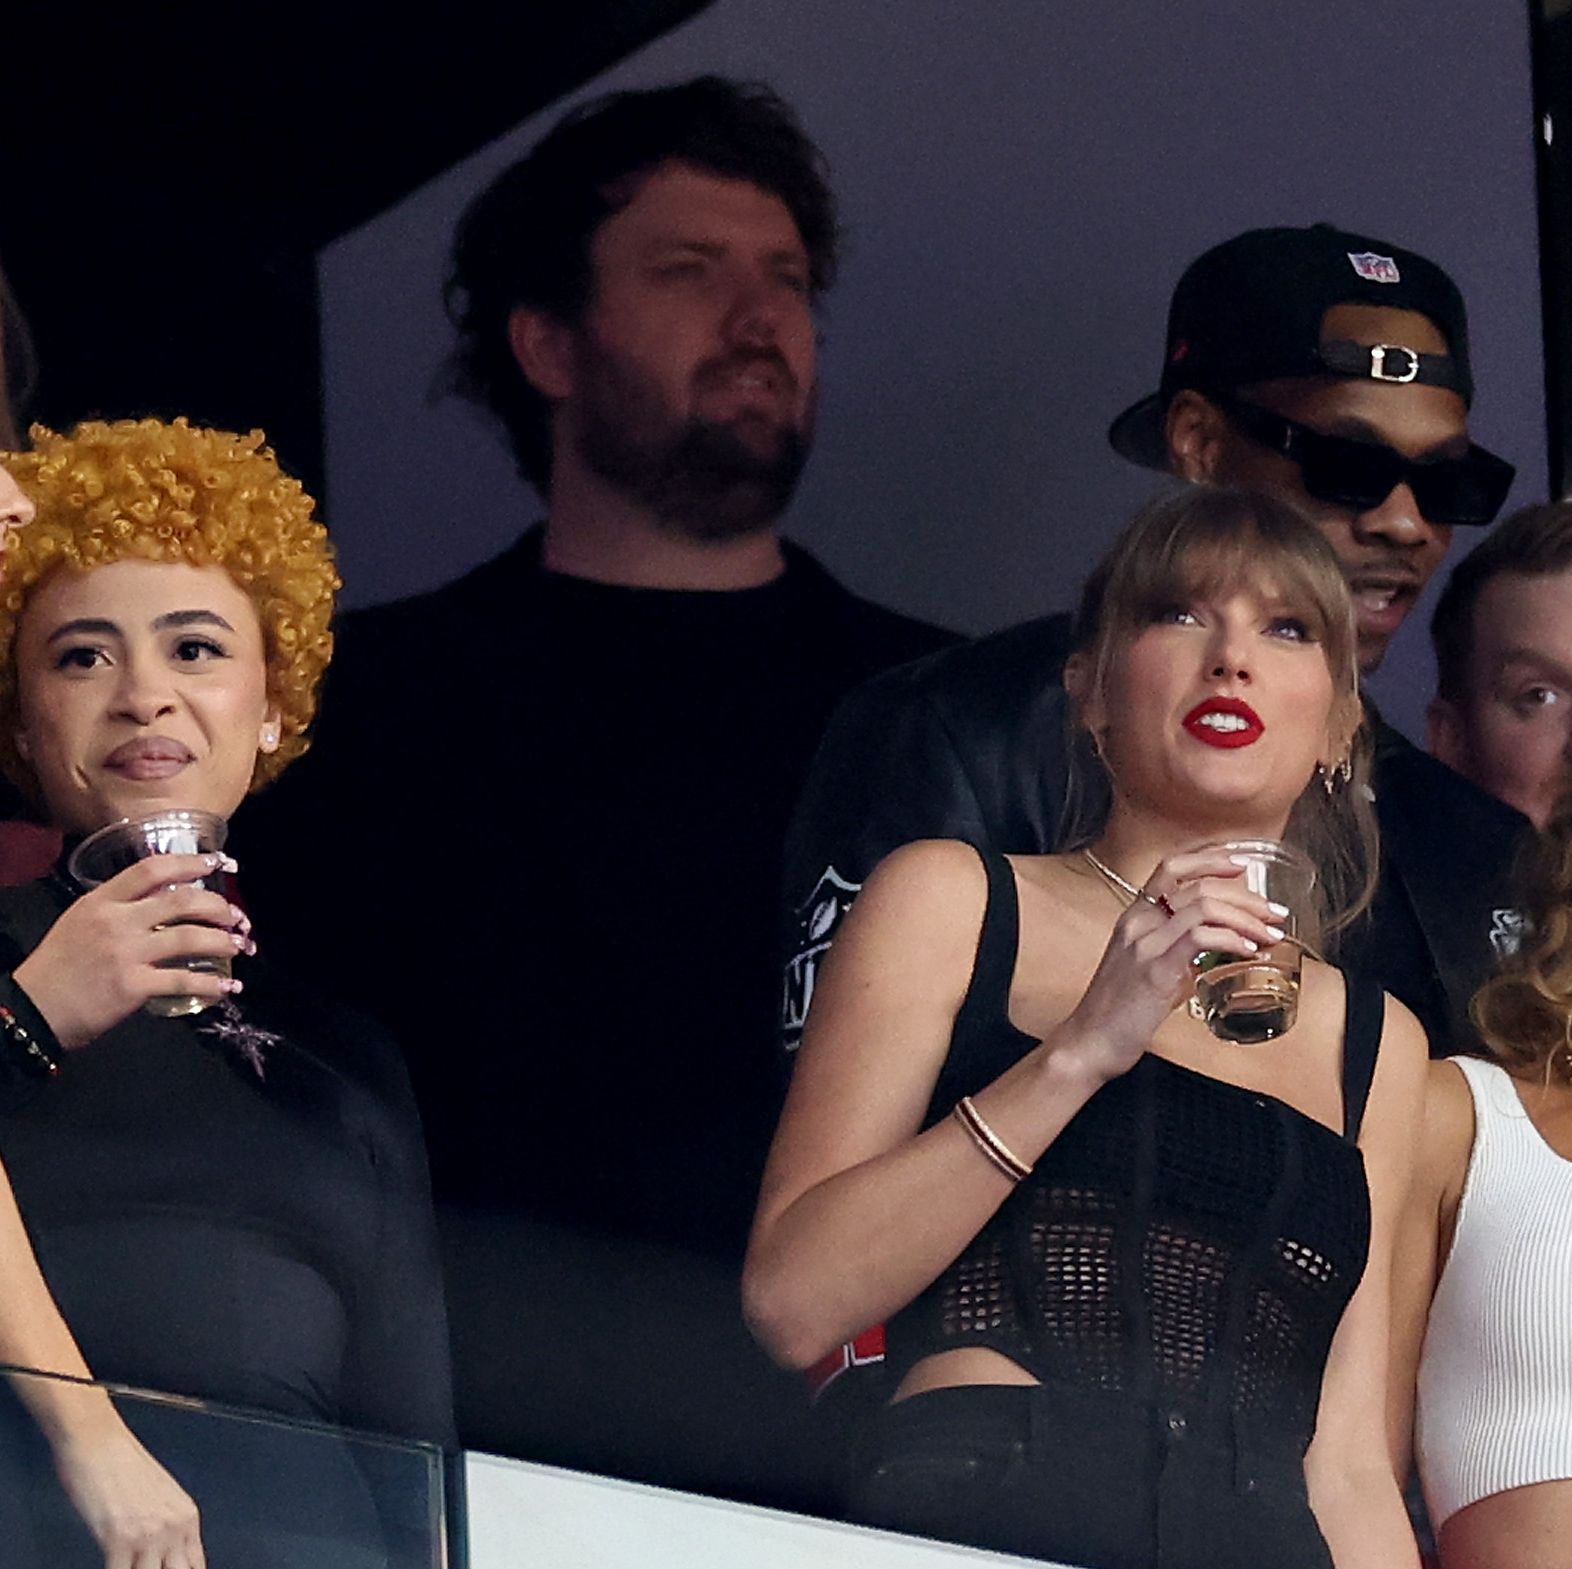 Of course Swift brought some friends.